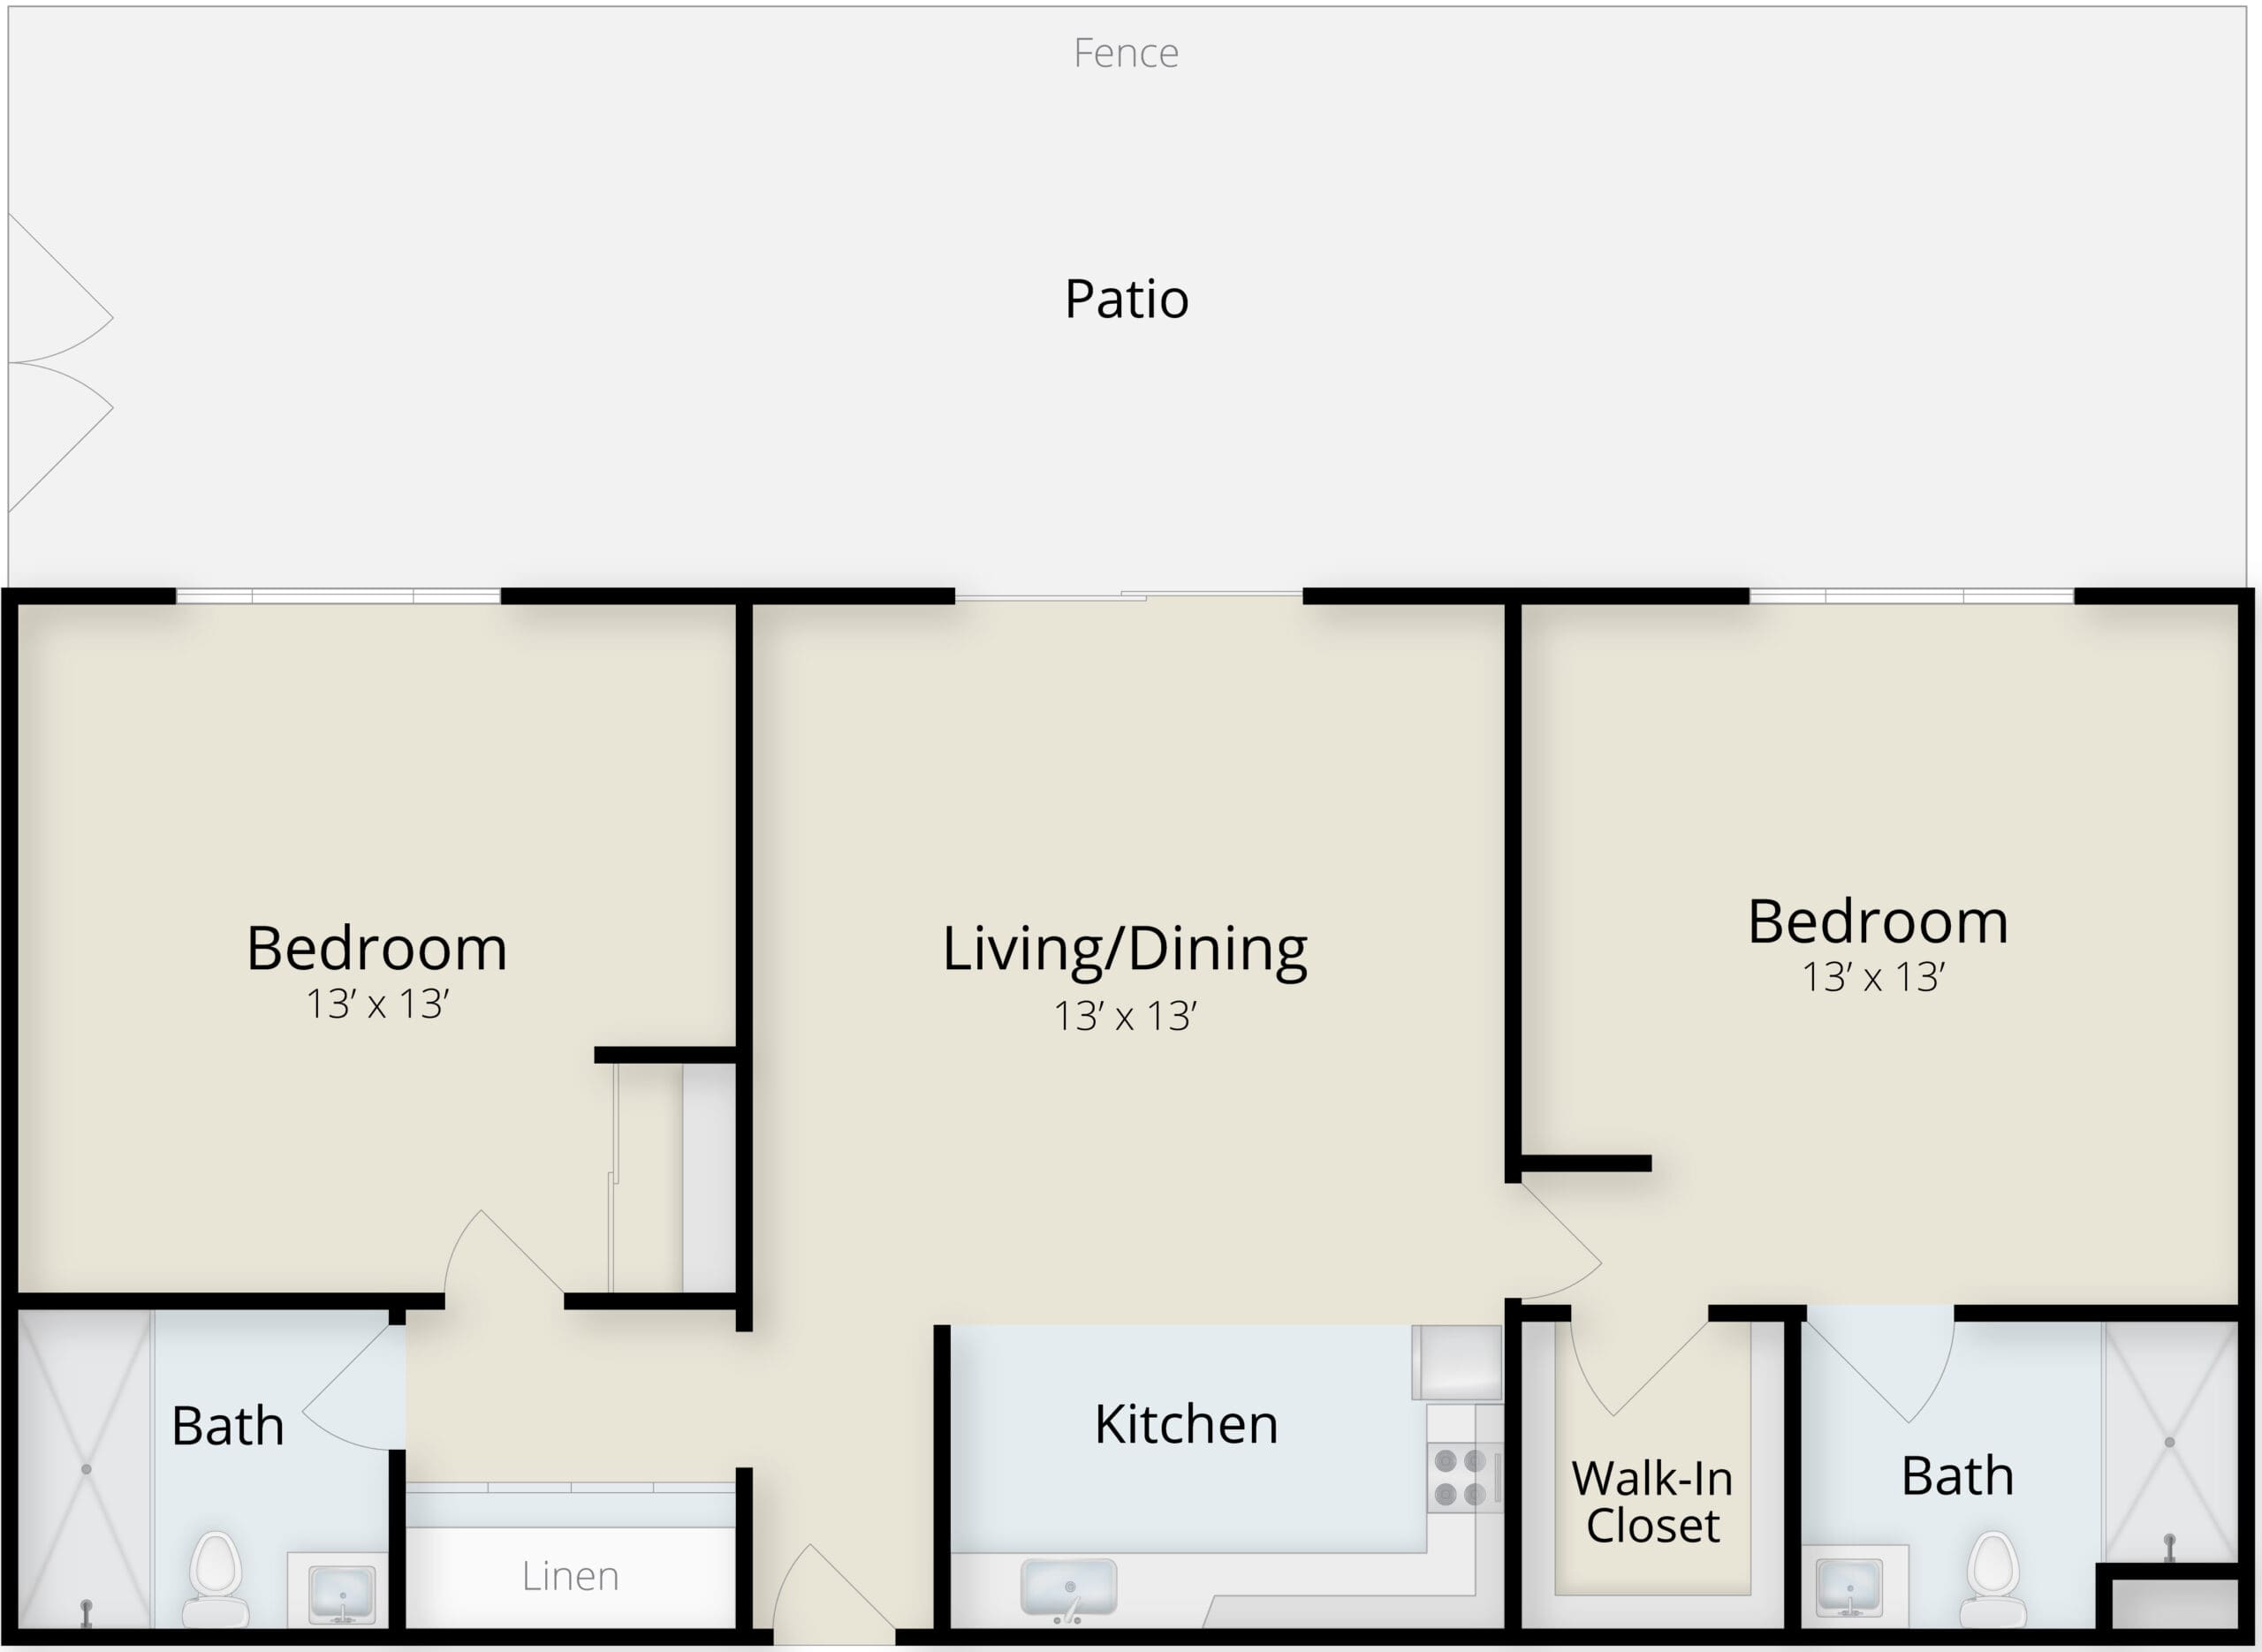 Two bedroom two bath cottage floor plan 800 sq ft